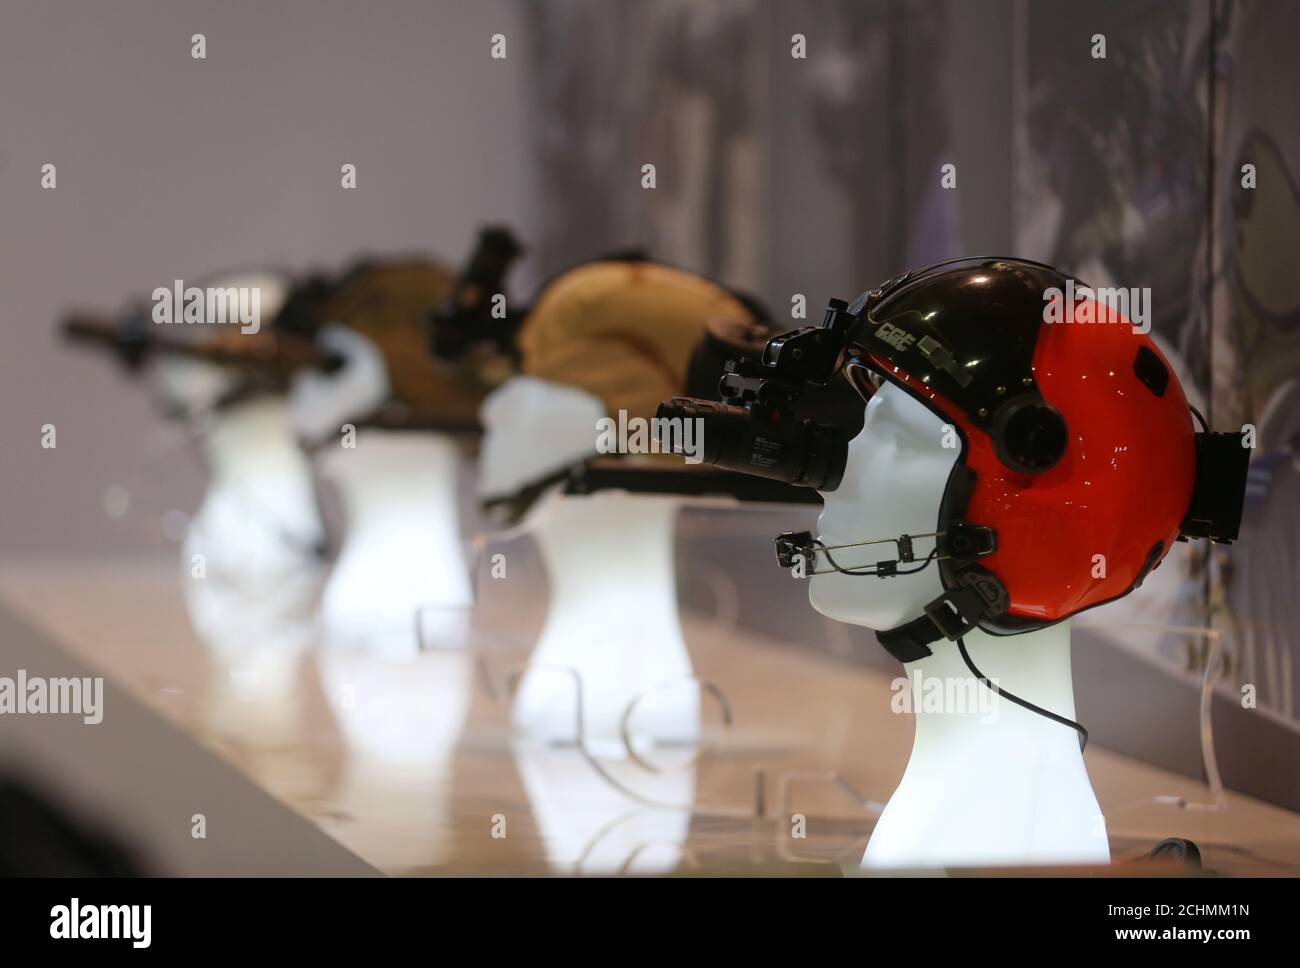 Military equipment is displayed on a booth at LAAD, the biggest military industry expo in Latin America, in Rio de Janeiro, Brazil April 4, 2017. REUTERS/Pilar Olivares Stock Photo